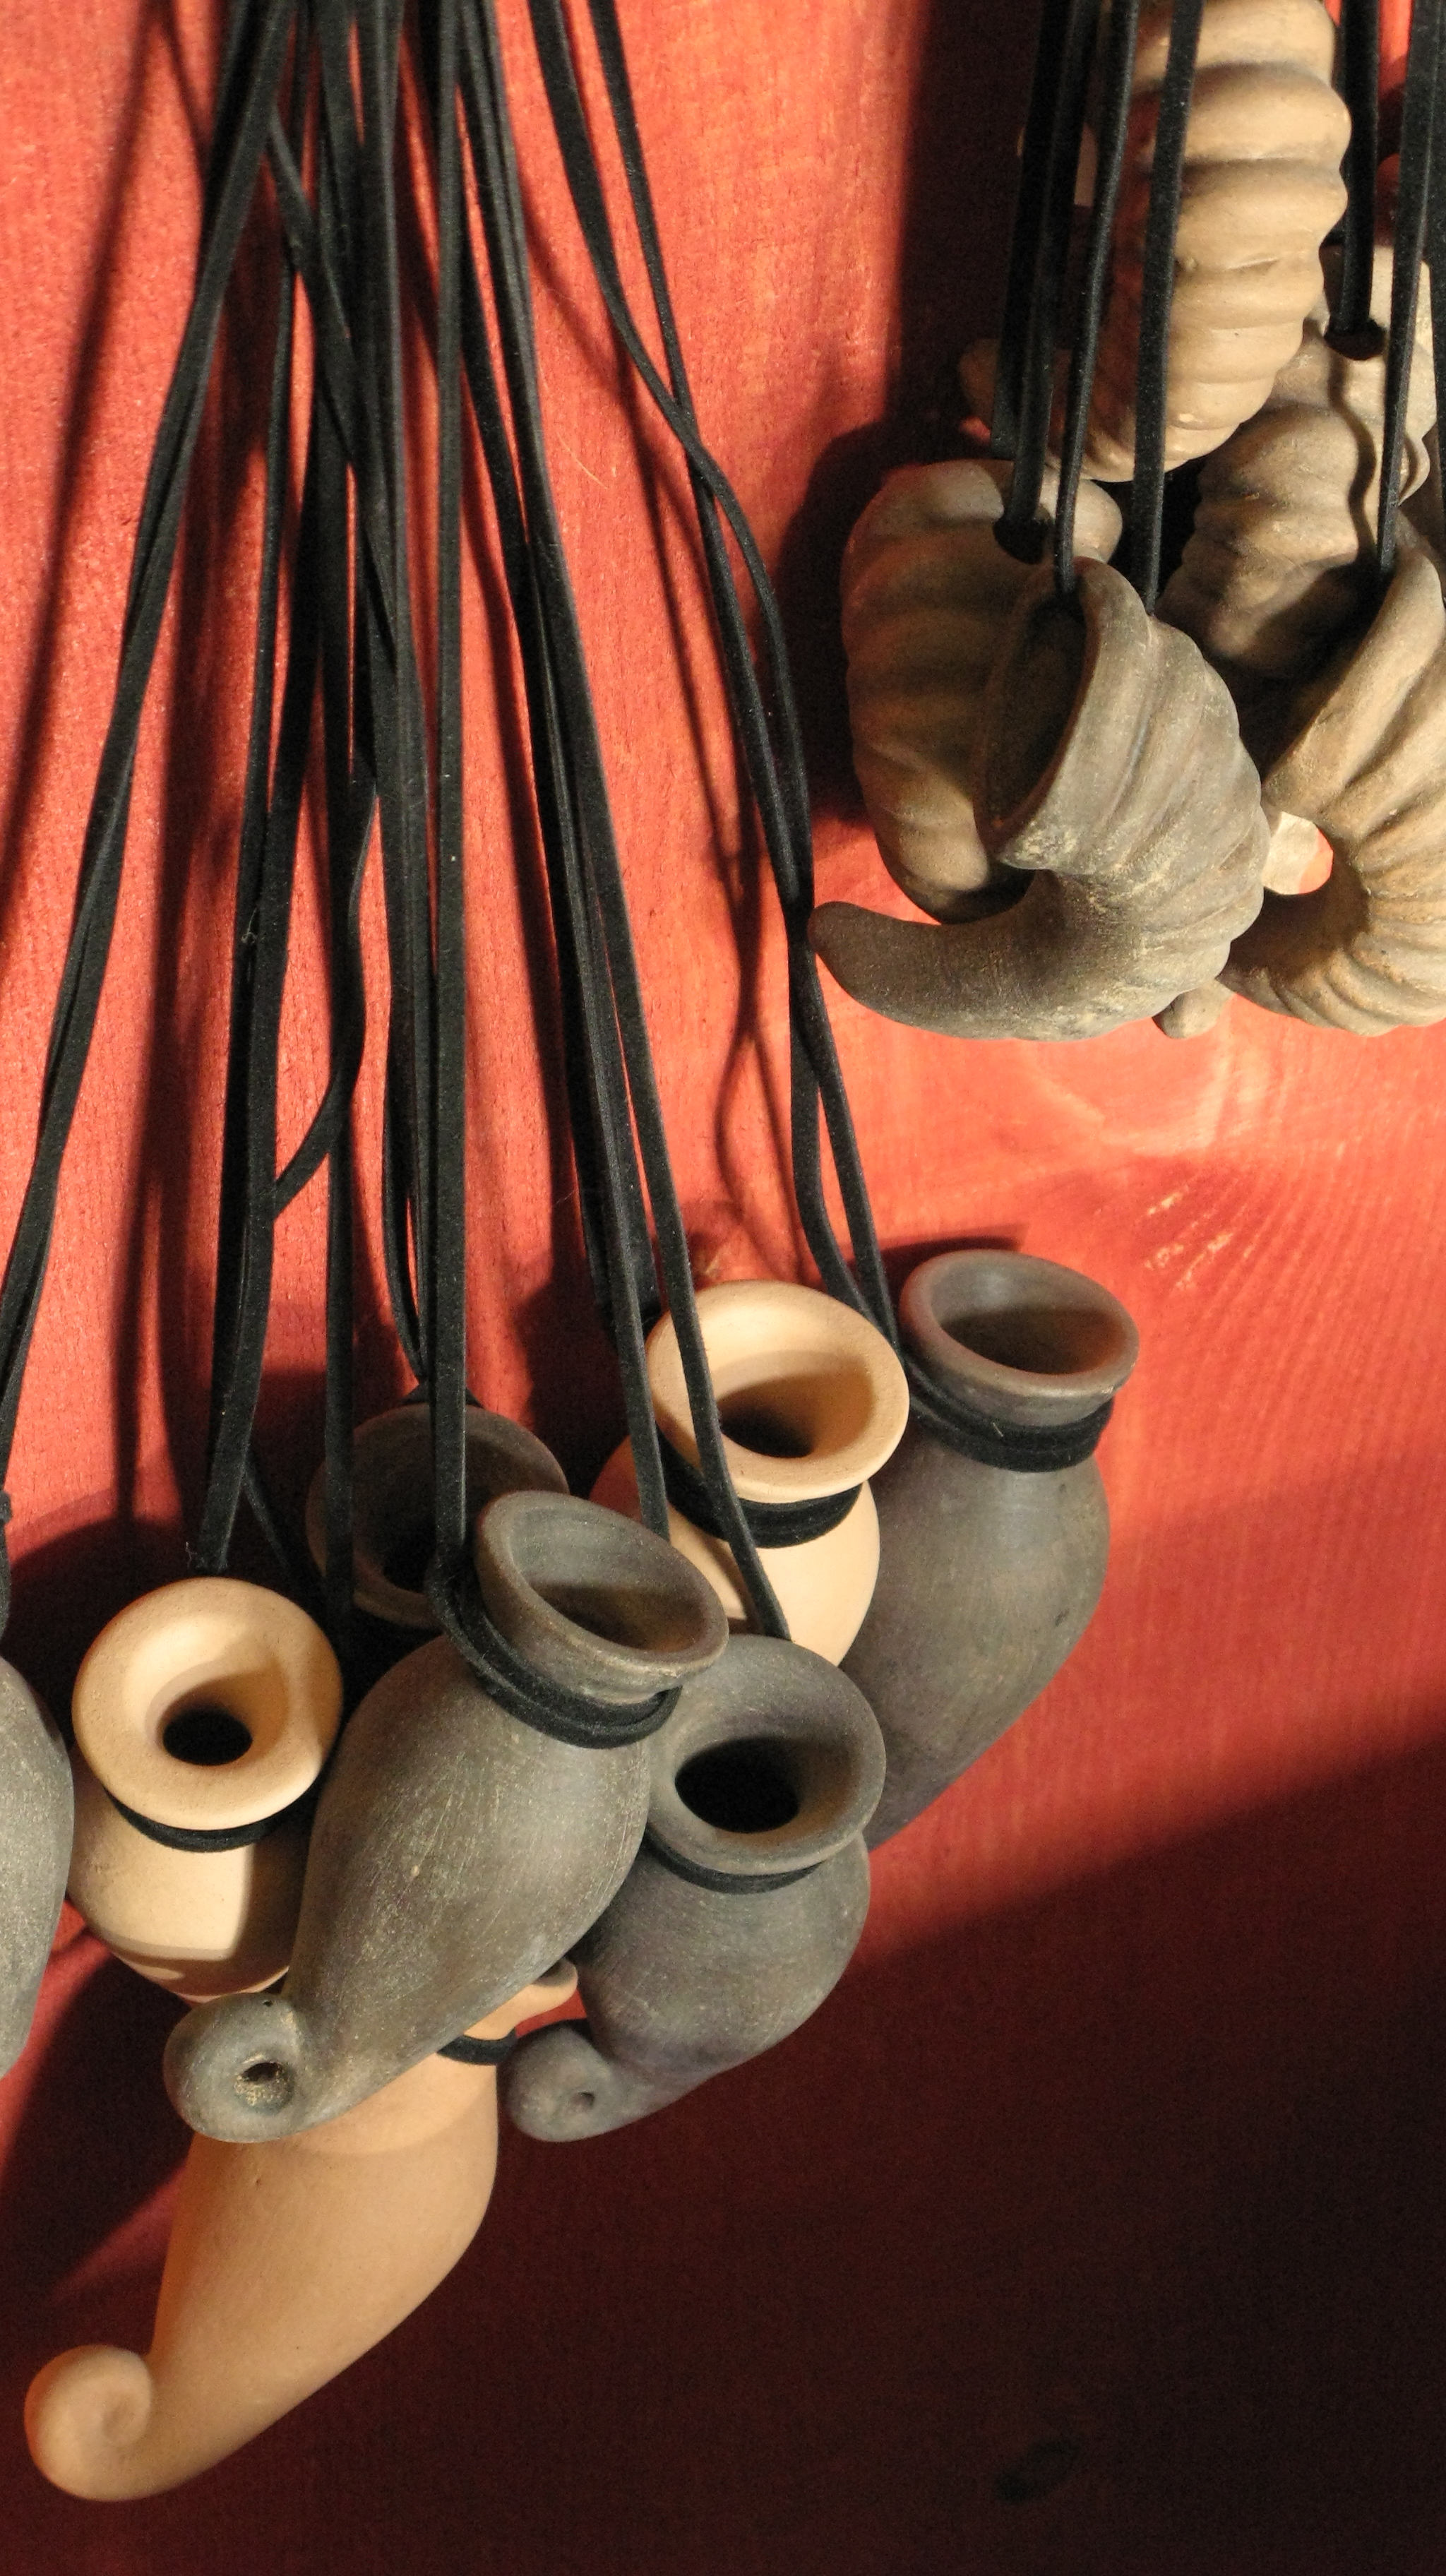 Miniature pottery works hanging on strings